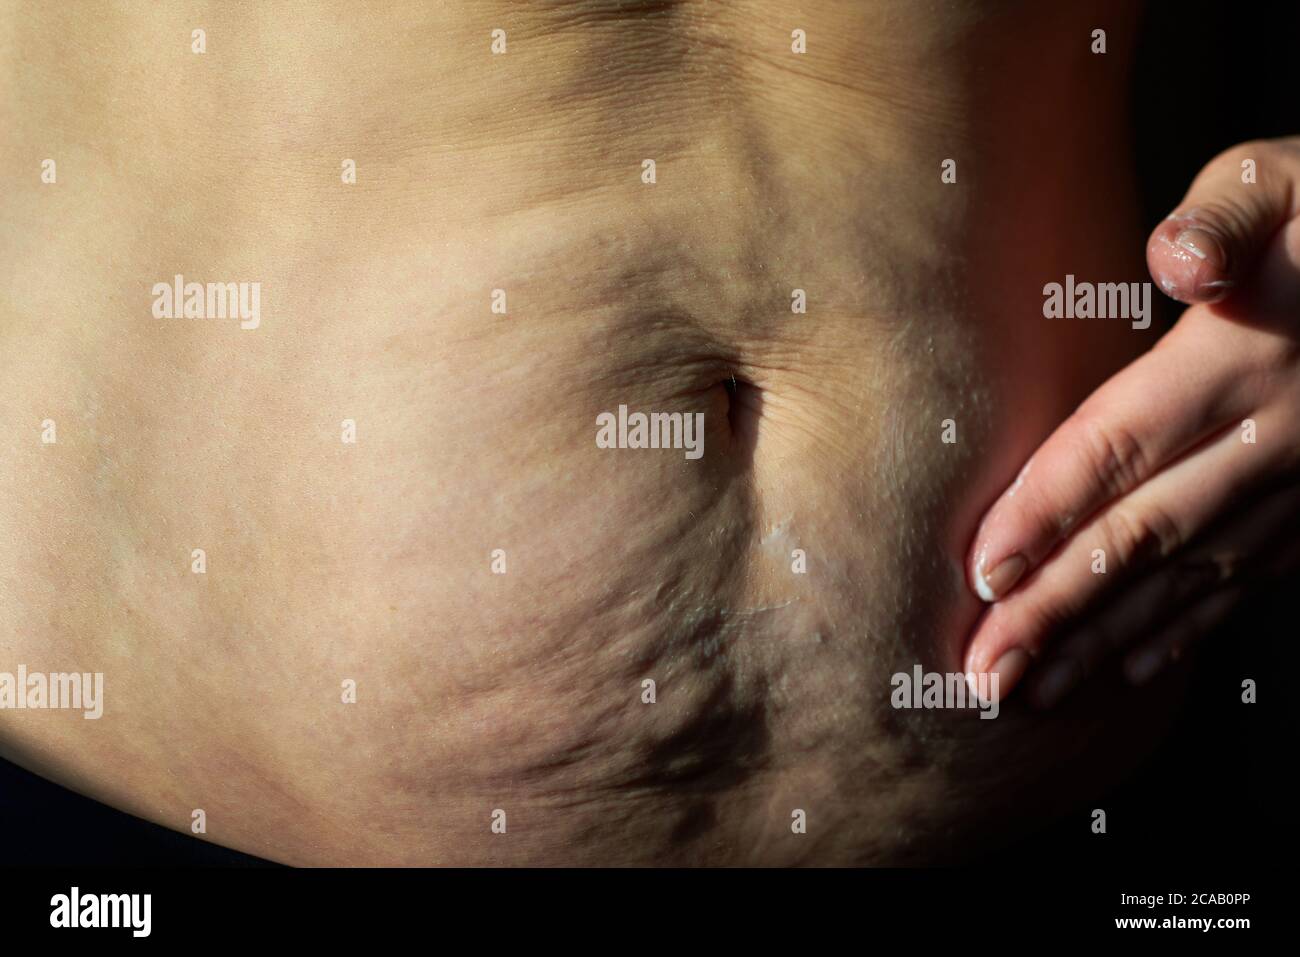 Woman smears nutritious cream sagging flabby belly with stretch marks, close-up. Stock Photo